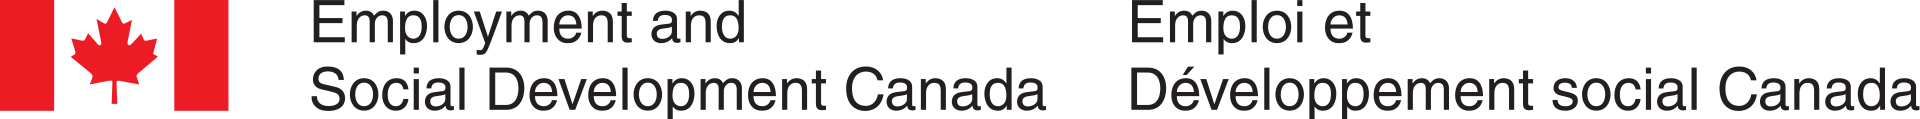 1920px-Employment_and_Social_Development_Canada_logo.svg.png